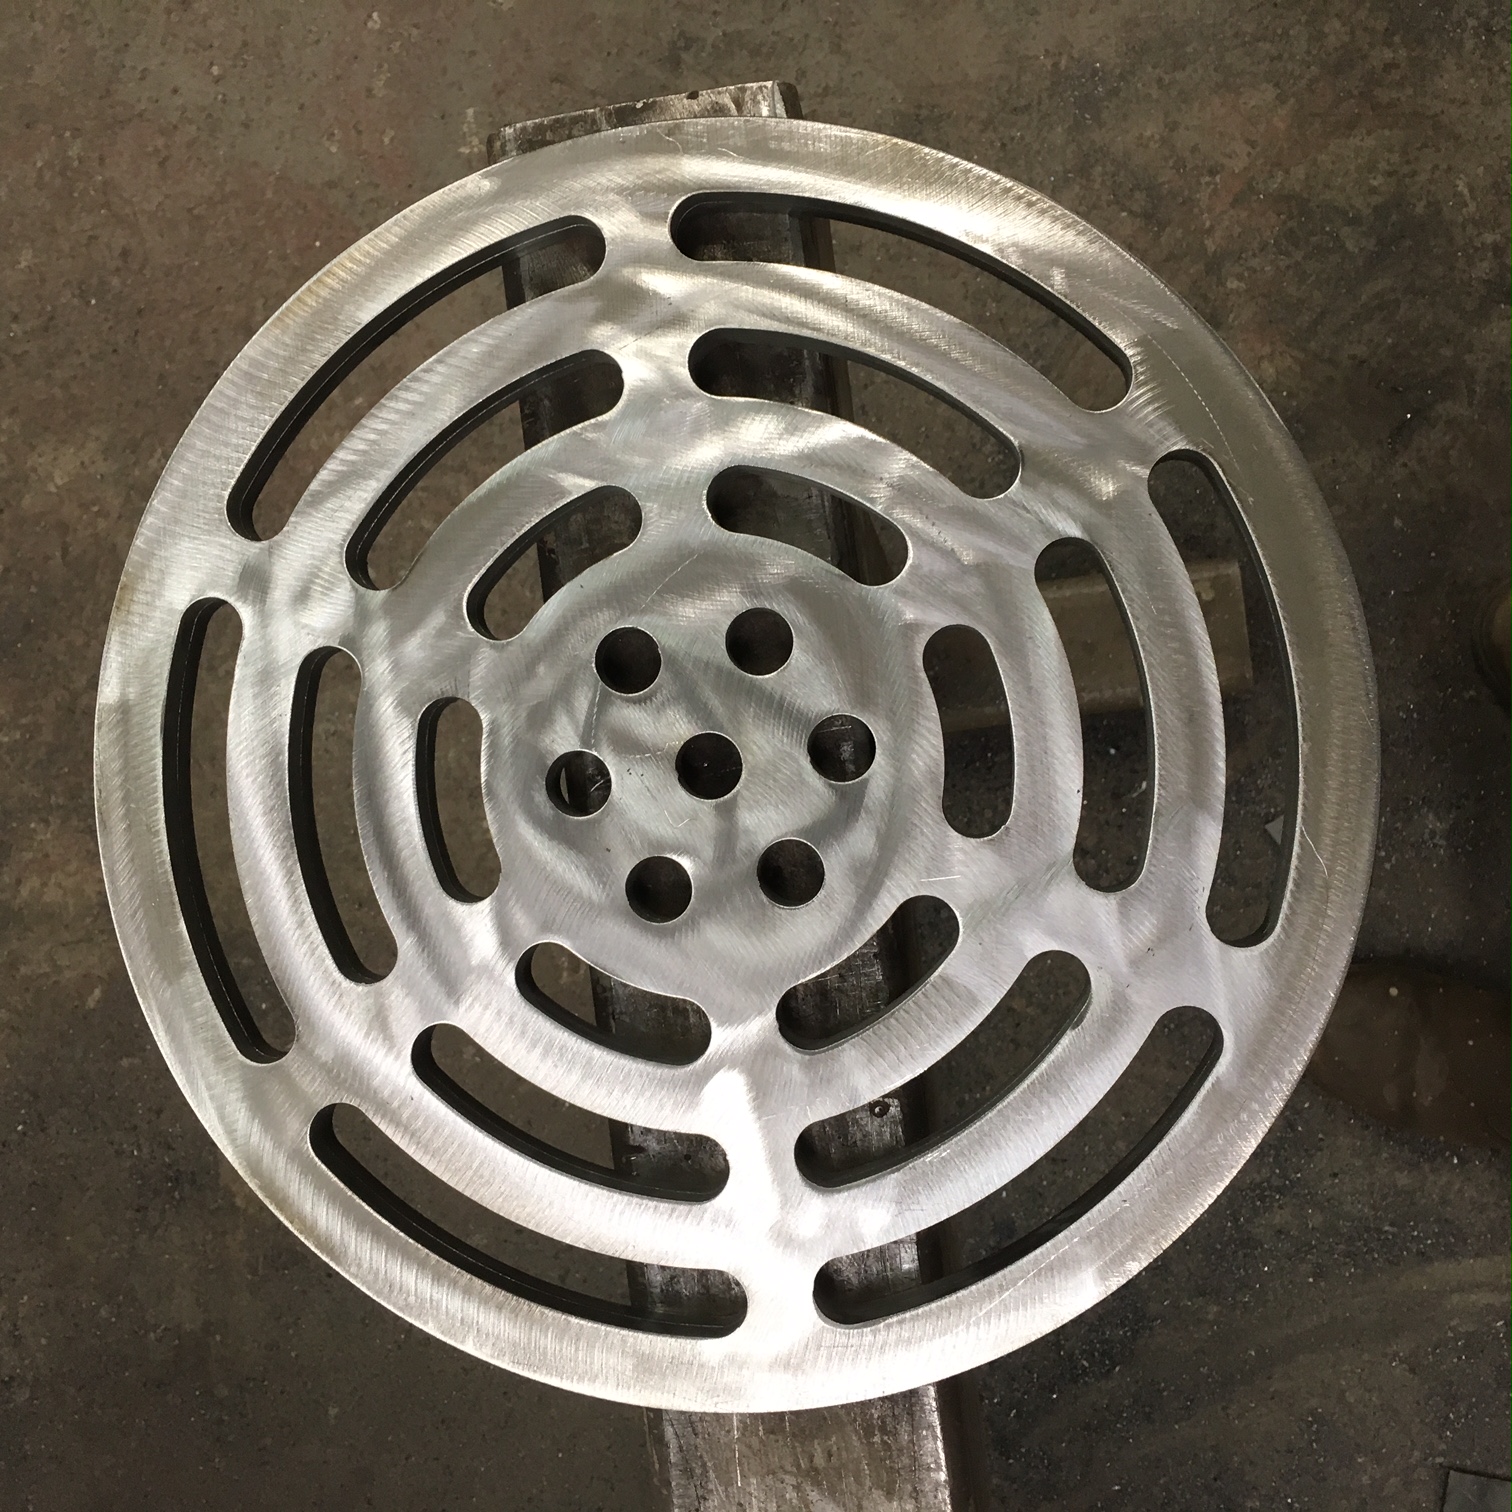 Manhole cover ready to be galvanised